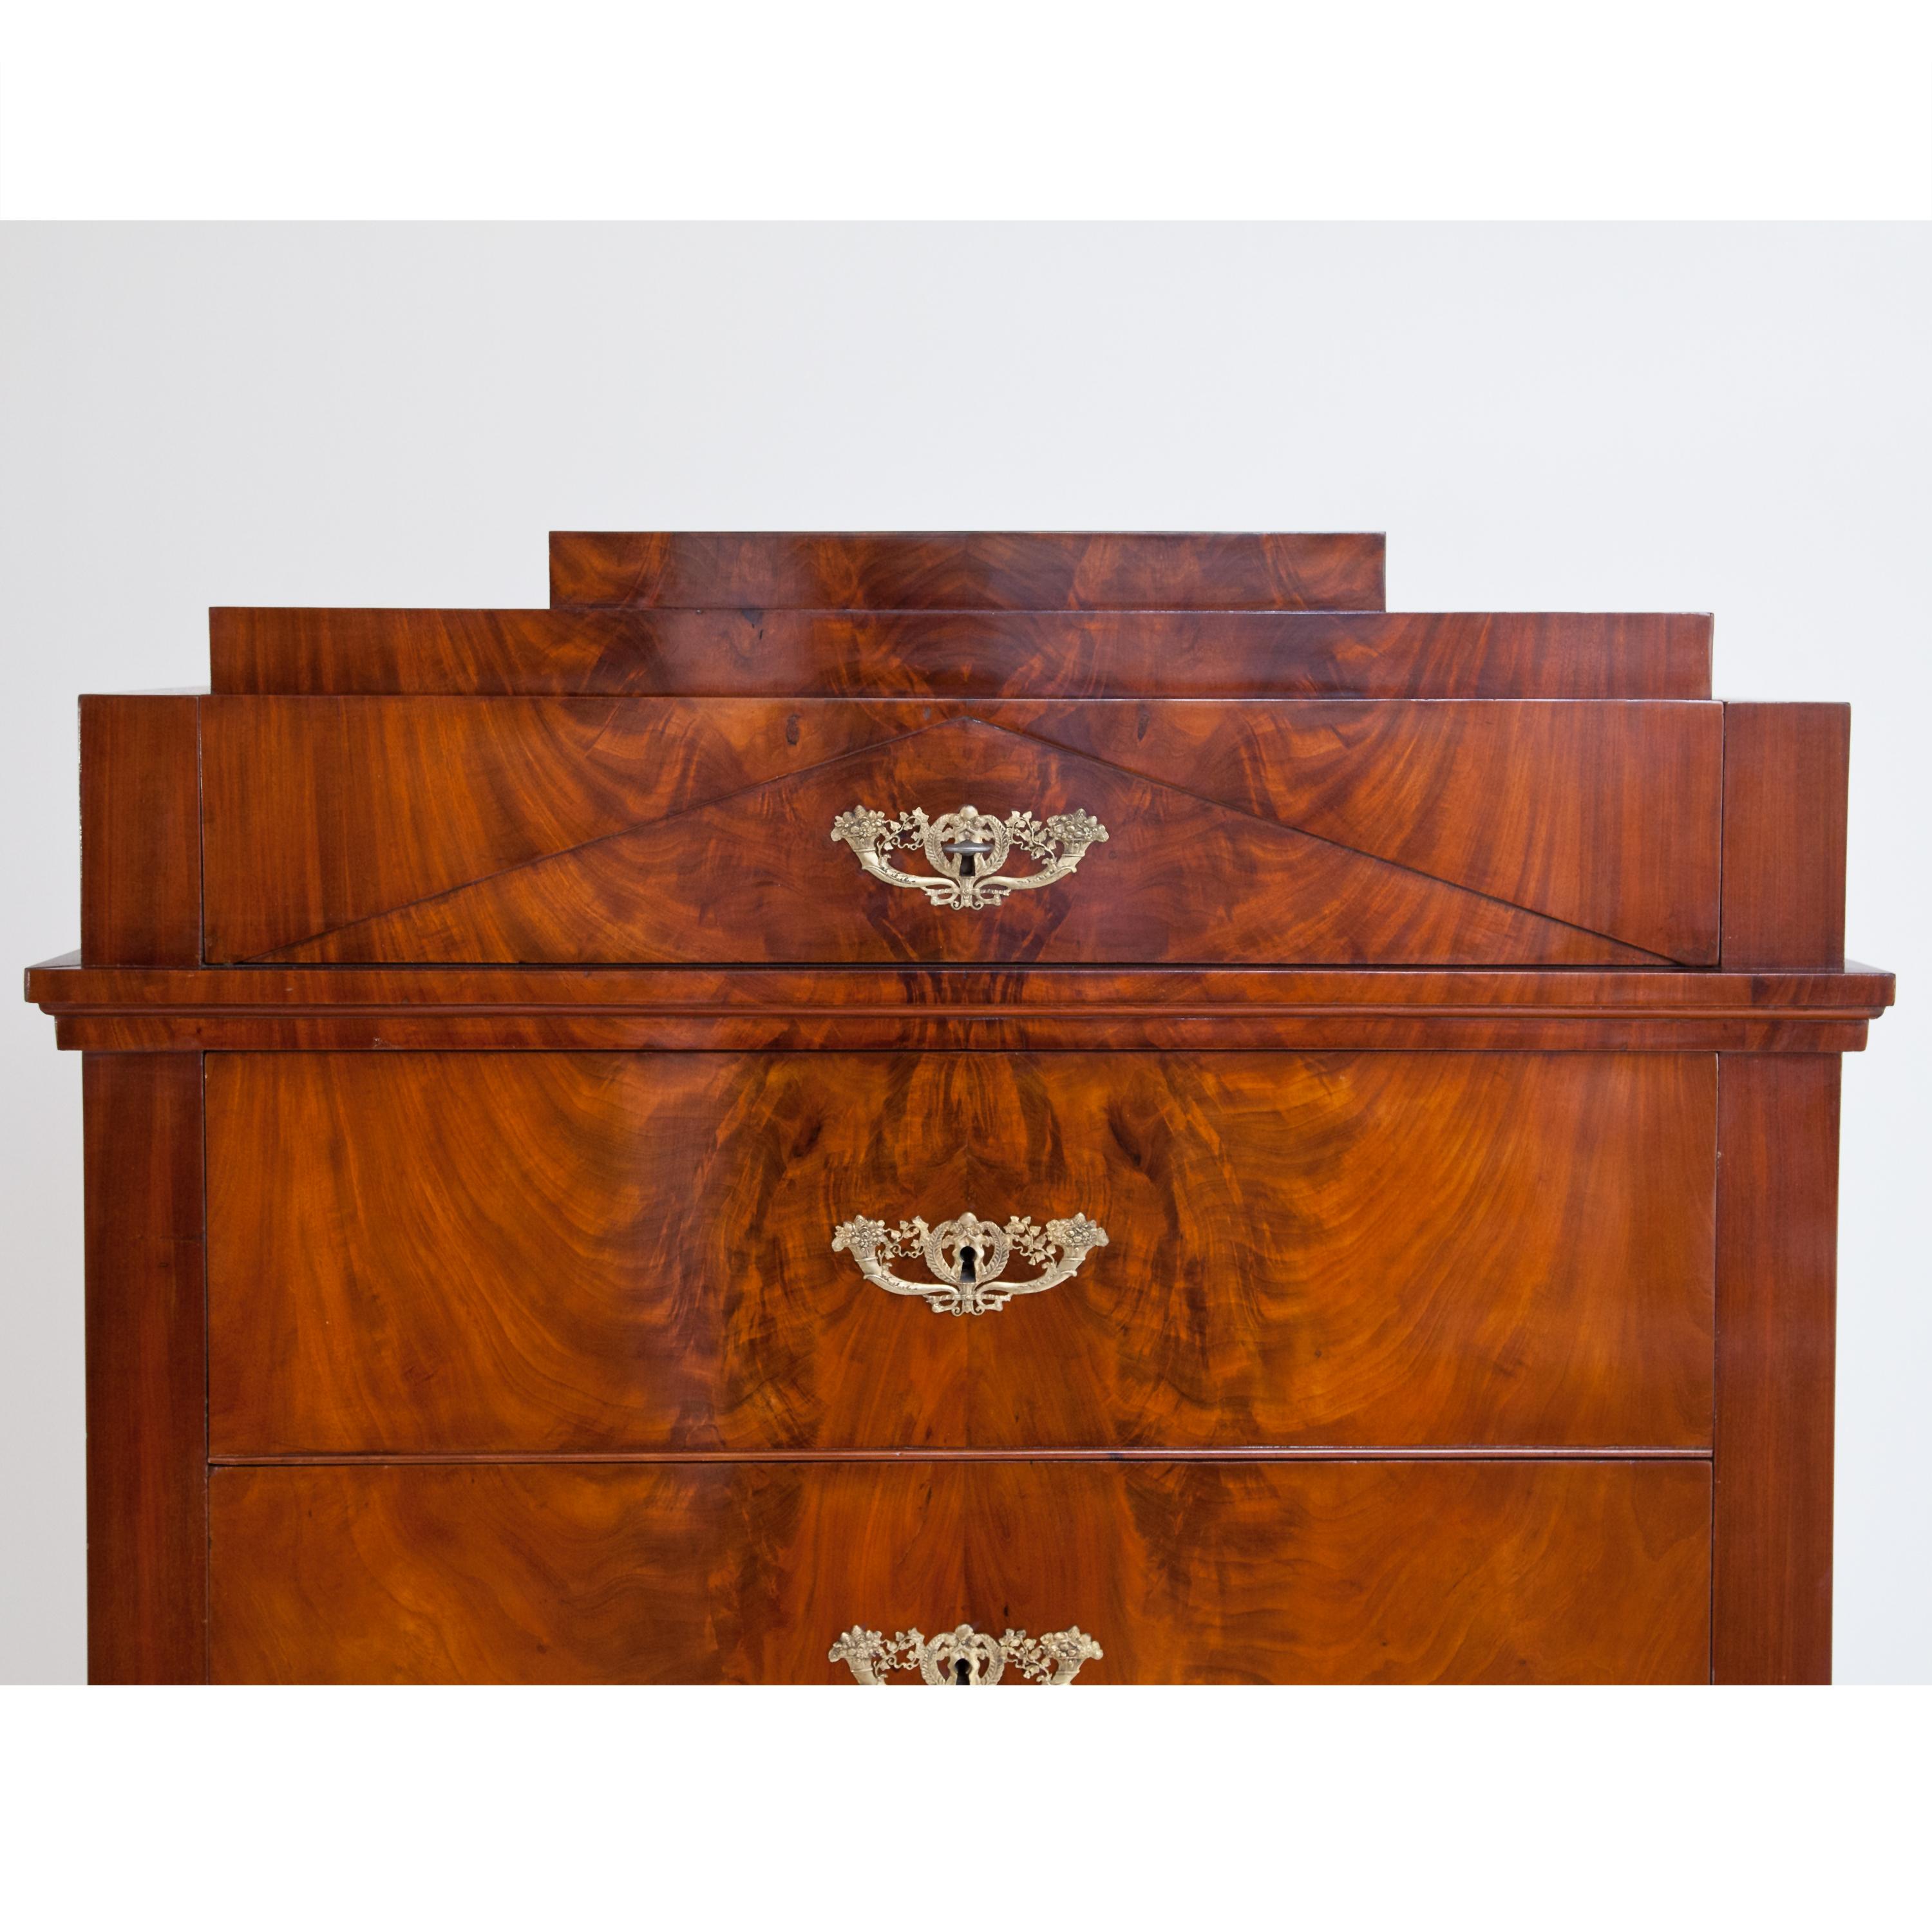 Early 19th Century Biedermeier Tall Chest of Drawers, circa 1820